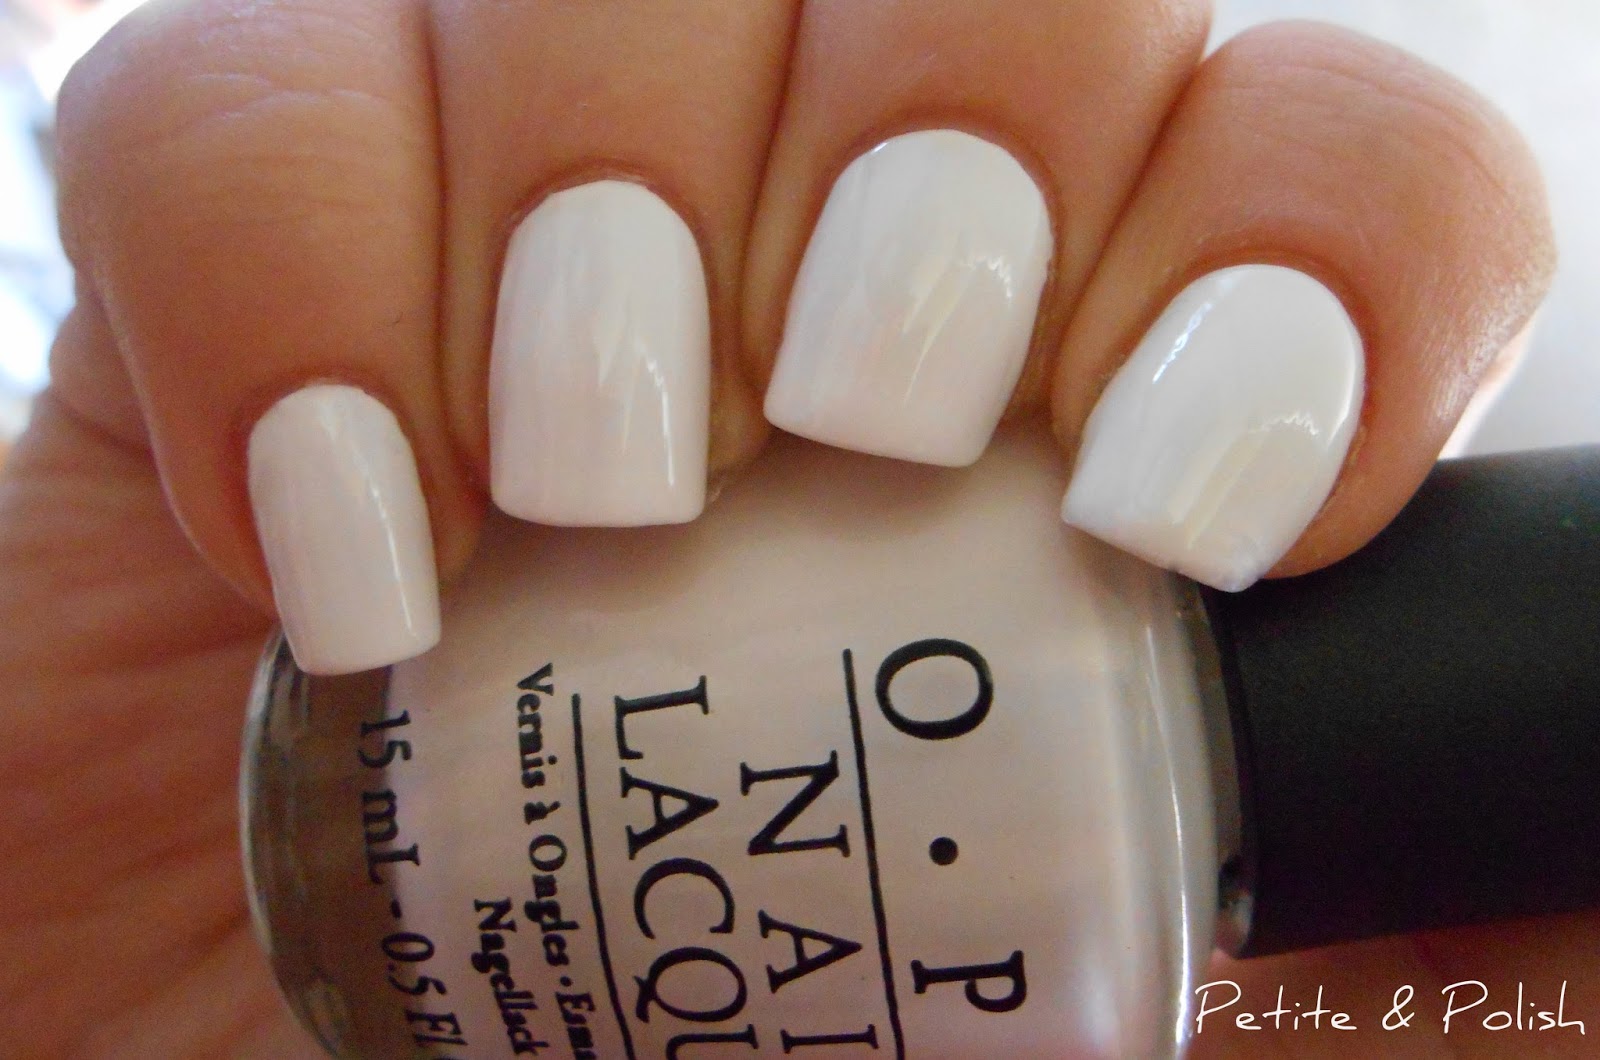 6. OPI Nail Lacquer - Alpine Snow - wide 2